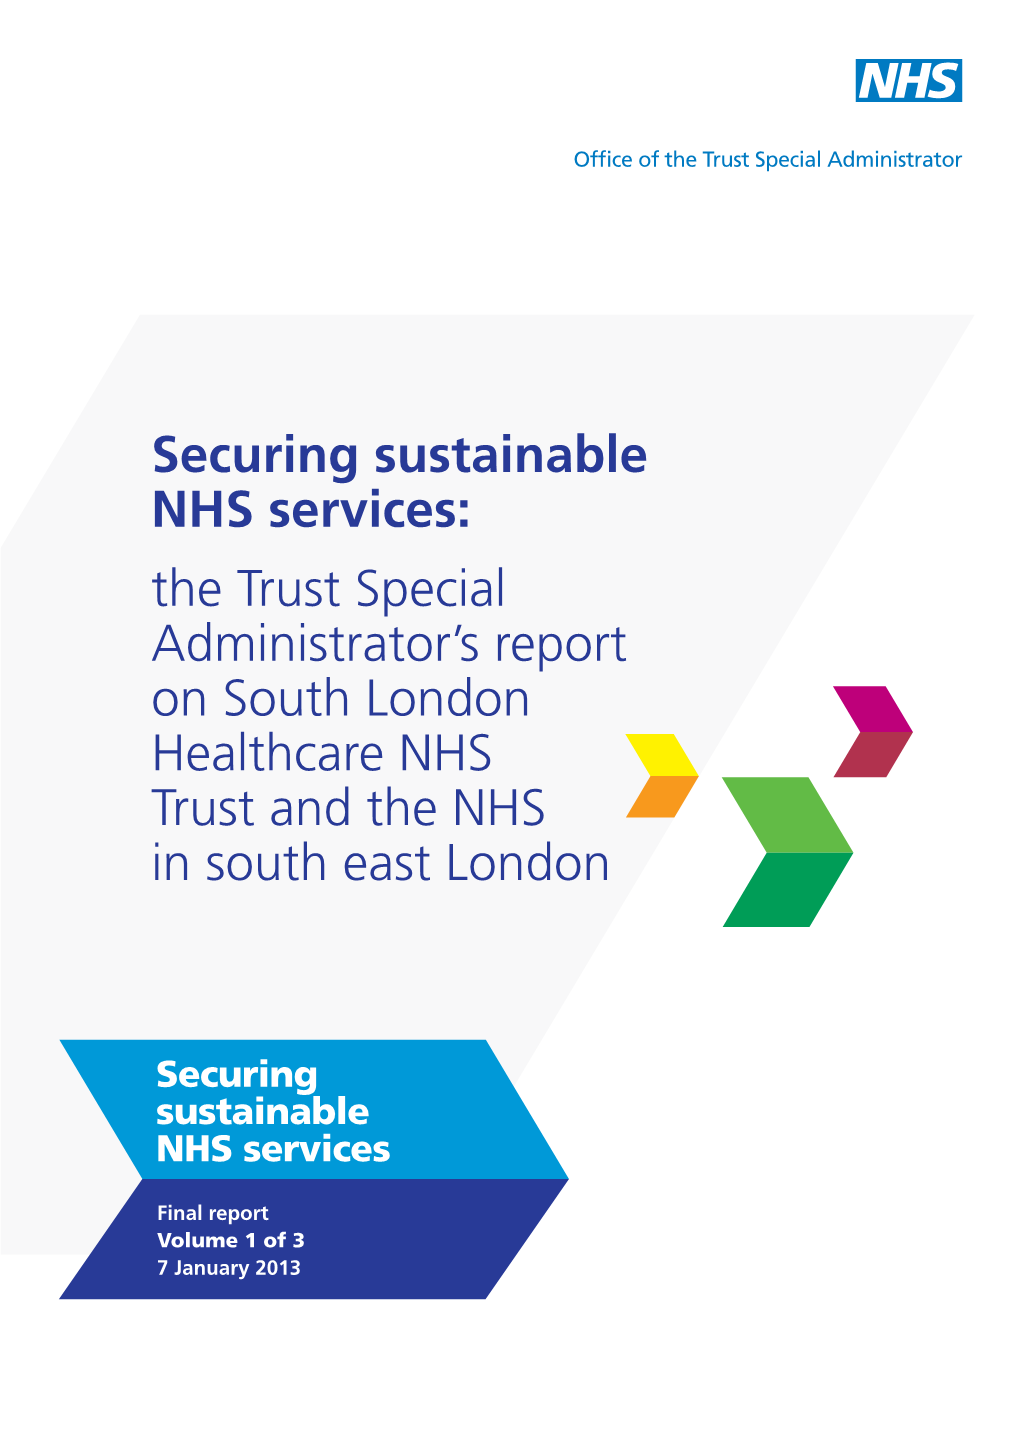 The Trust Special Administrator's Report on South London Healthcare NHS